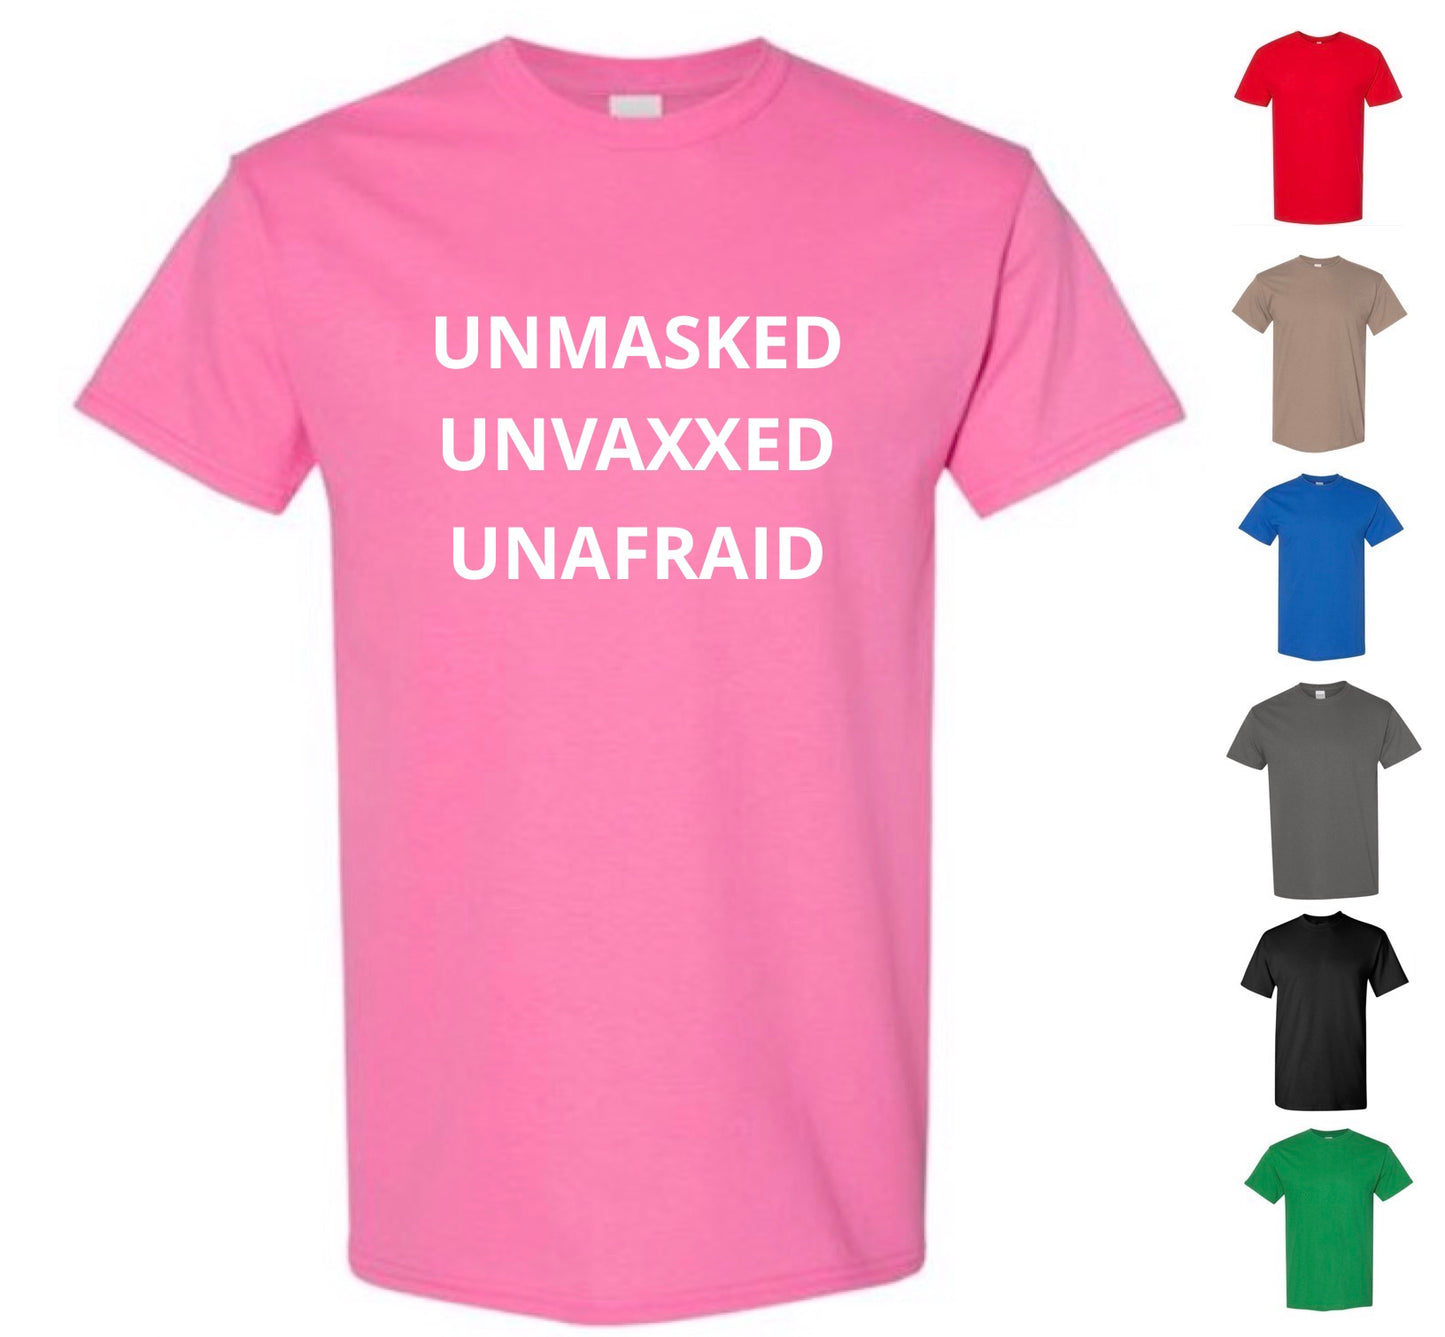 Unmasked, Unvaxxed, and Unafraid T-Shirt (FREE Shipping!)